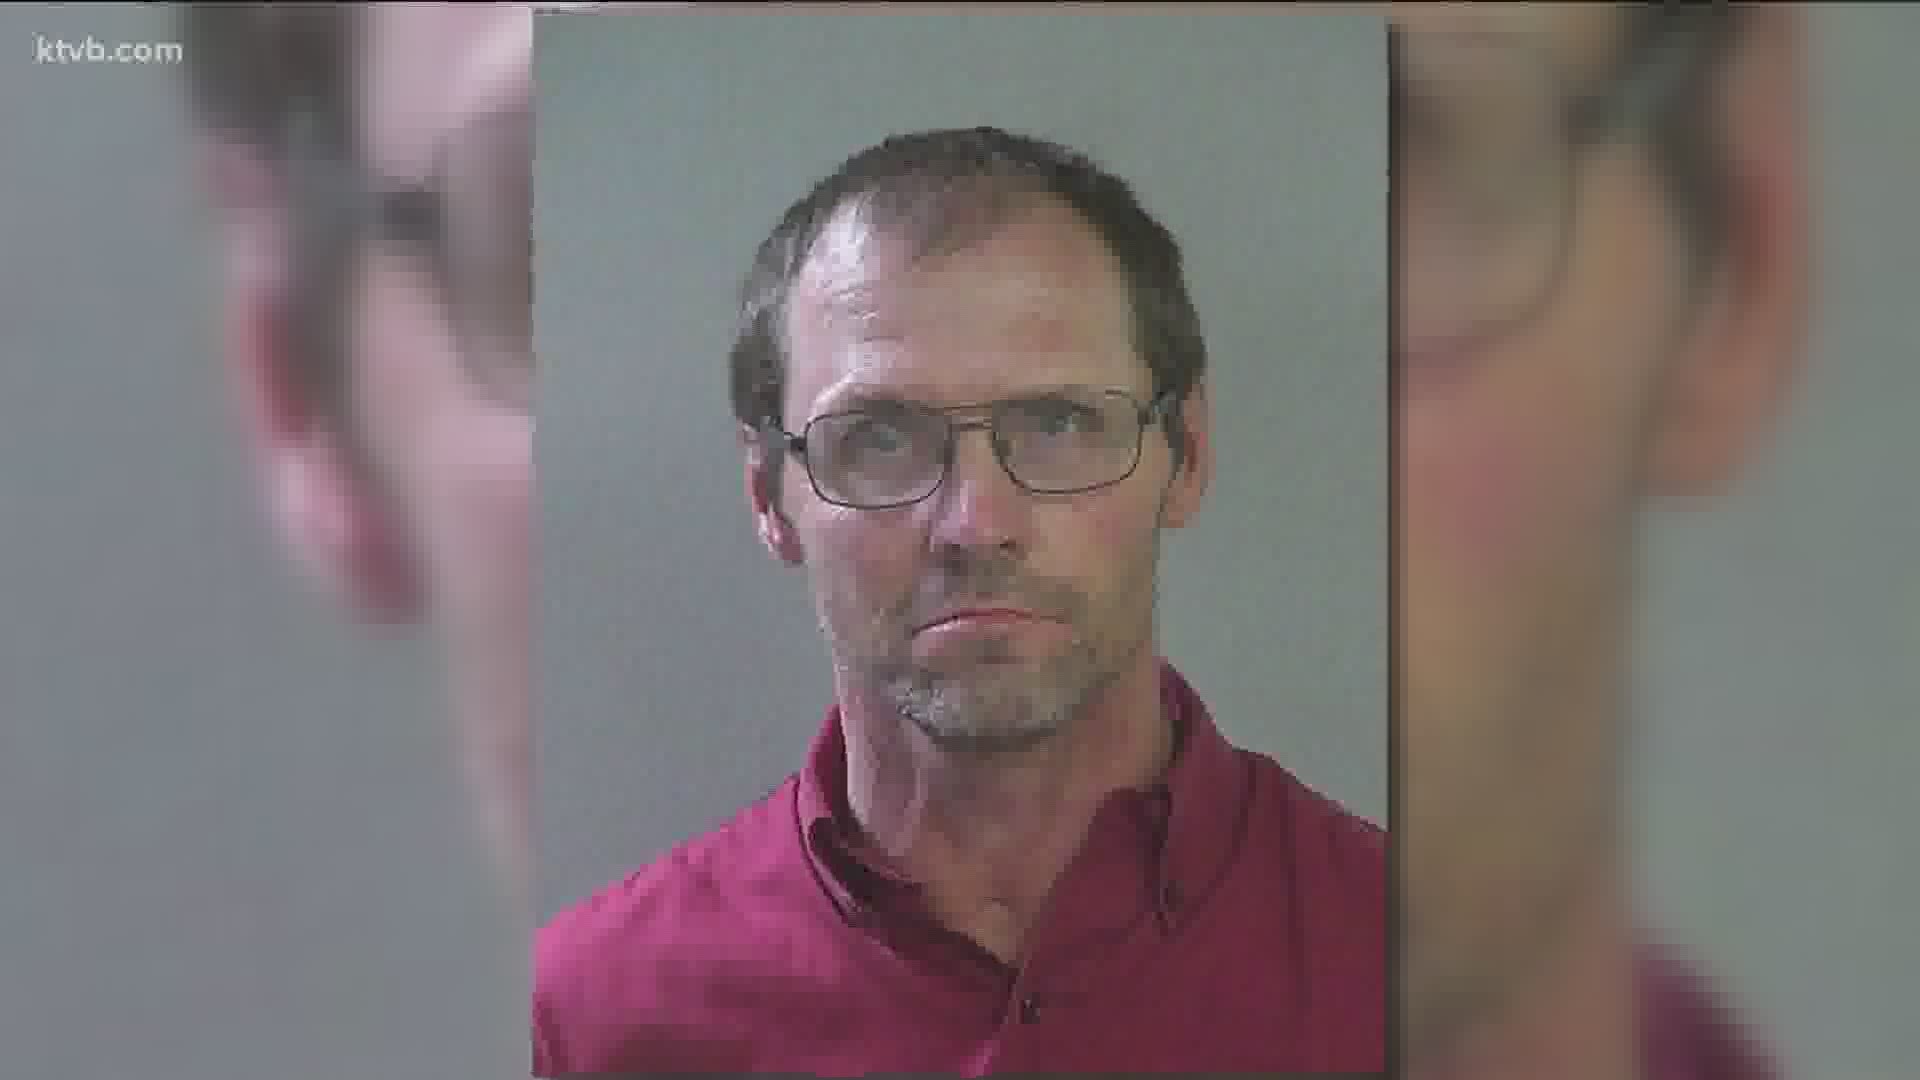 Karl Kukuchka is charged with leaving the scene of an accident and vehicular manslaughter in connection to the Nov. 5 crash that killed 68-year-old Barbara Alexander